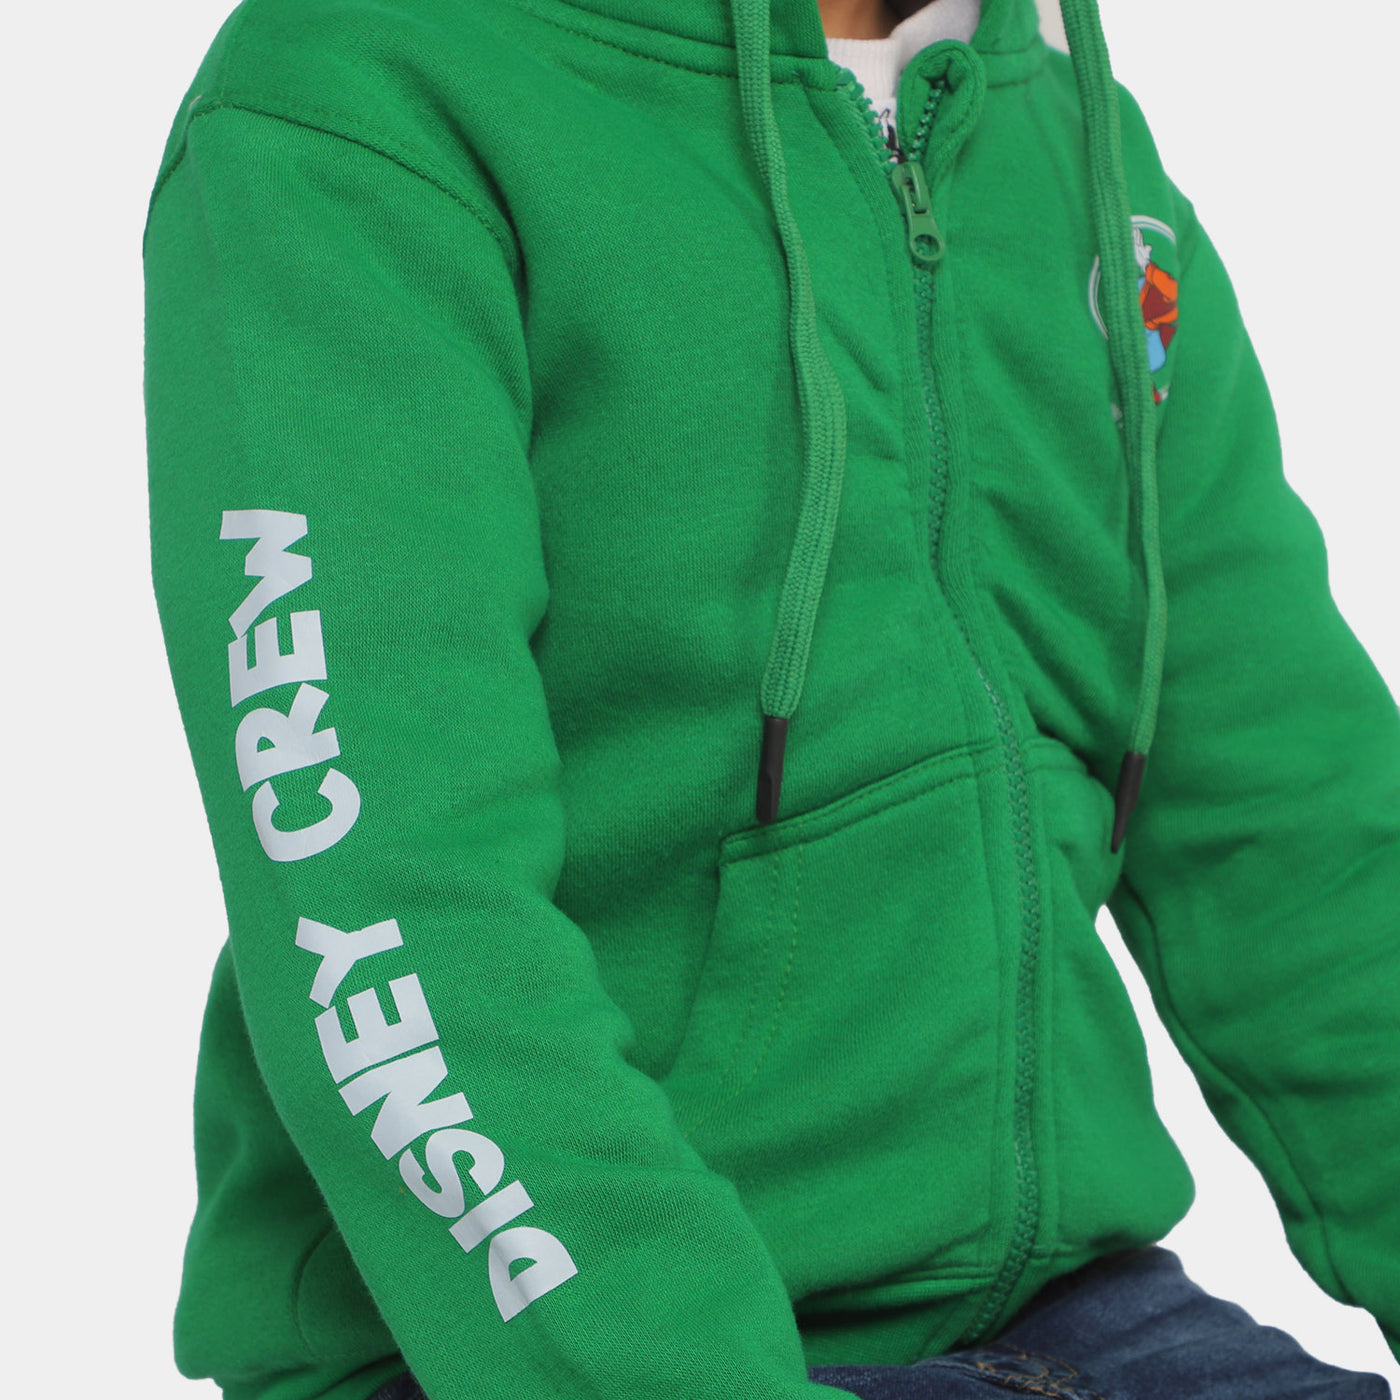 Boys Knitted Jacket - Green